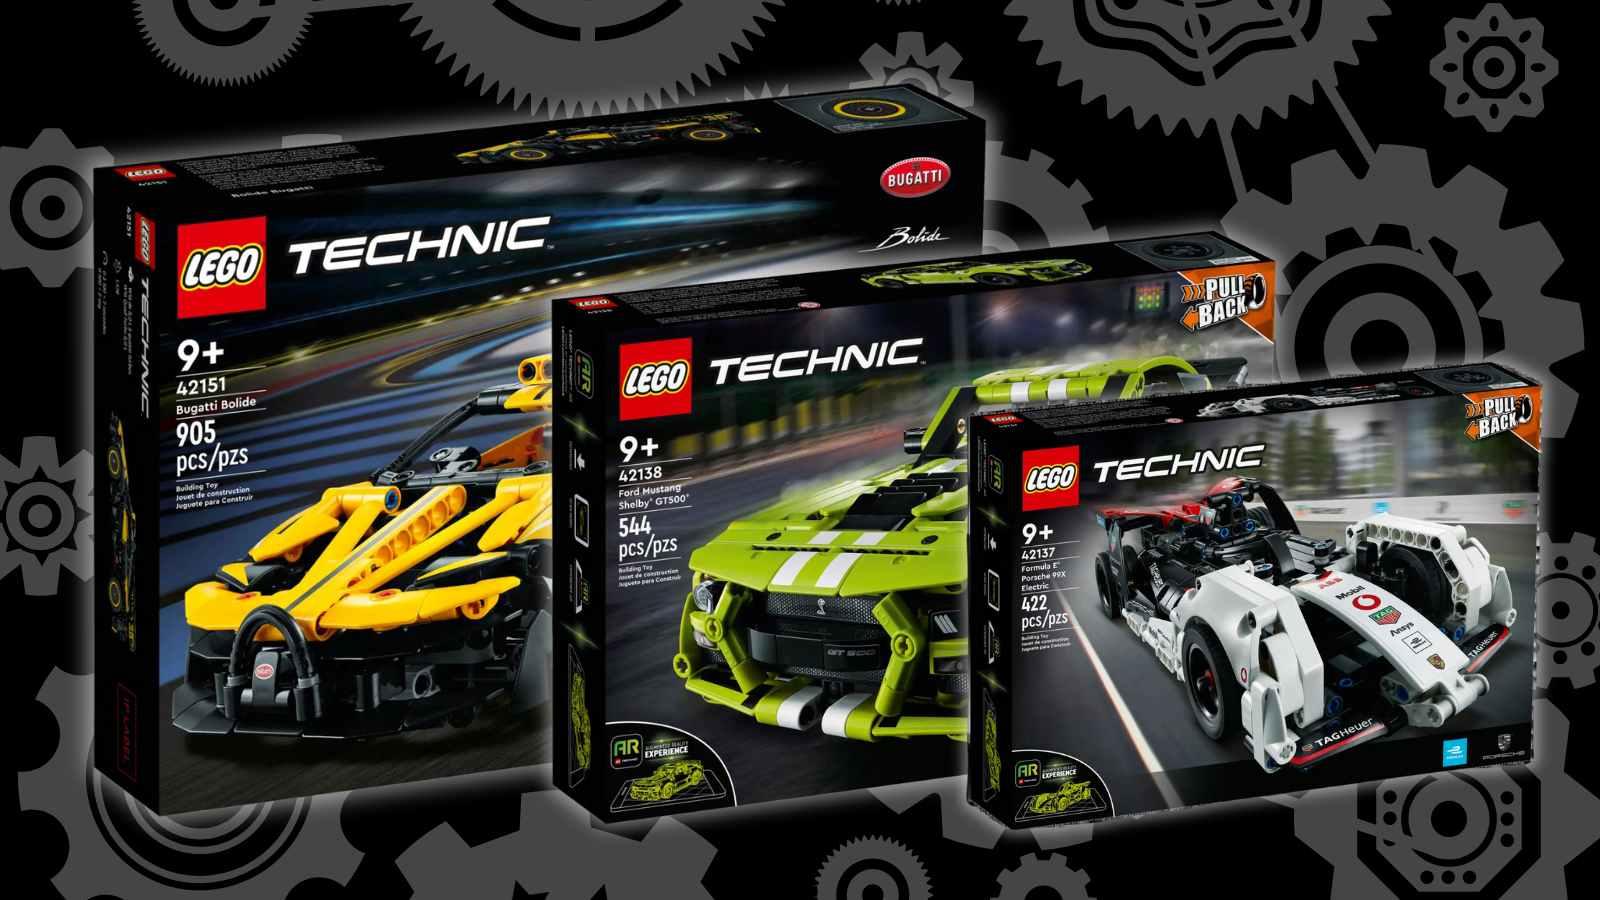 Three of the LEGO Technic sets on discount at Amazon